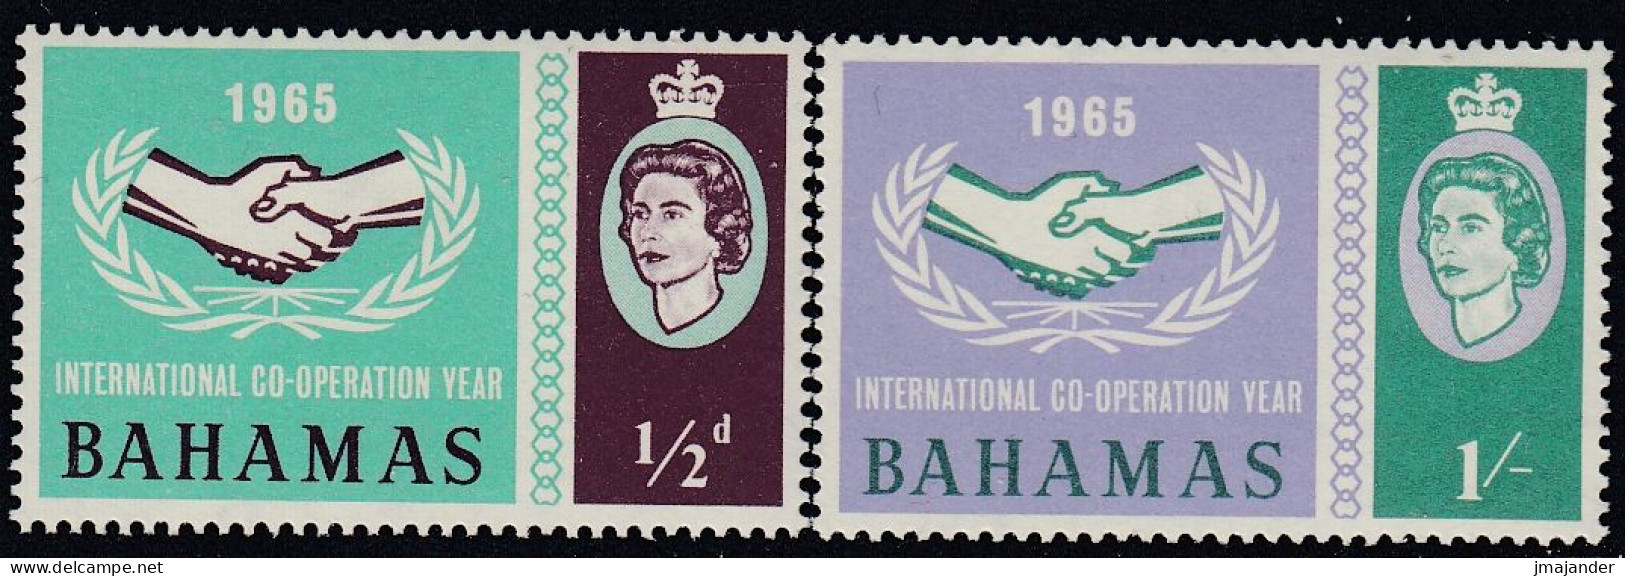 Bahamas 1965 - International Co-operation Year - Mi 227-228 ** MNH - 1963-1973 Ministerial Government